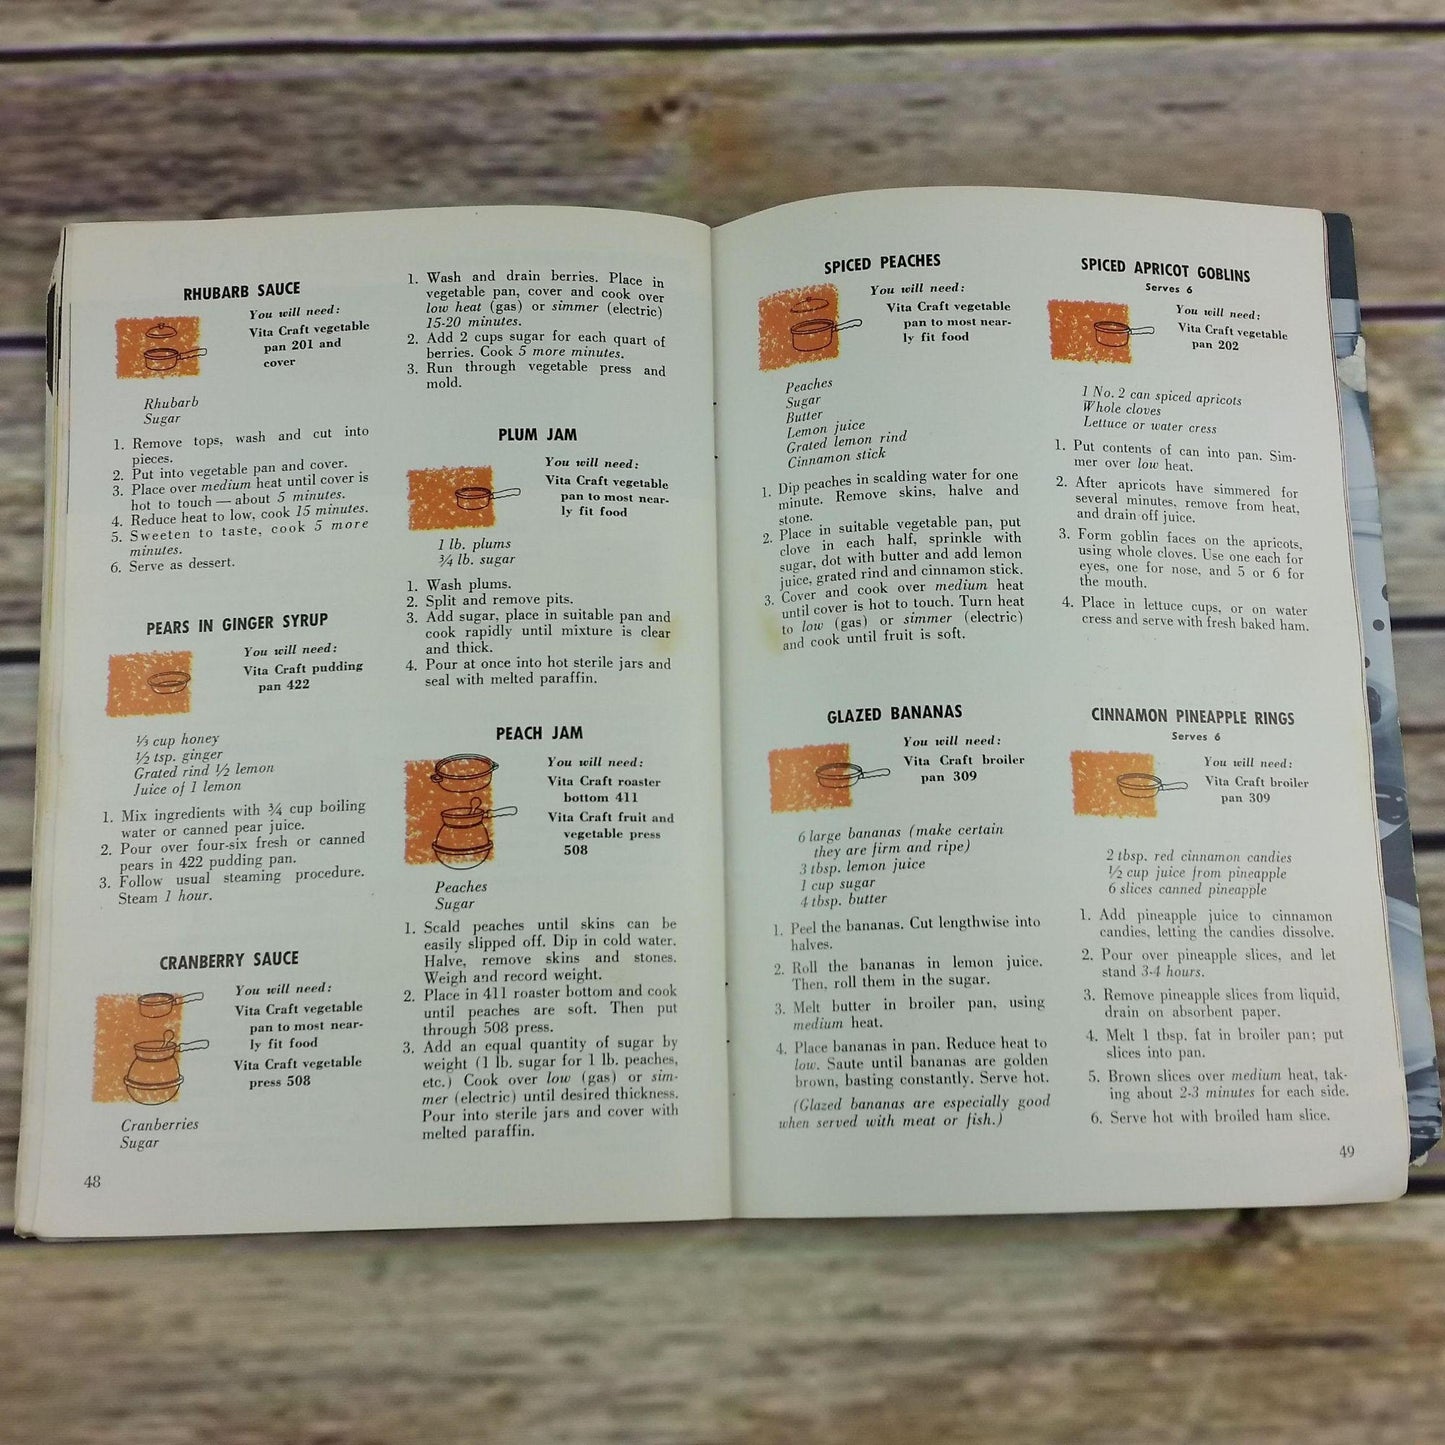 Vintage Cookbook Vita Craft Cookware Recipes Instructions Manual VC275 Utensils 1960s or Earlier